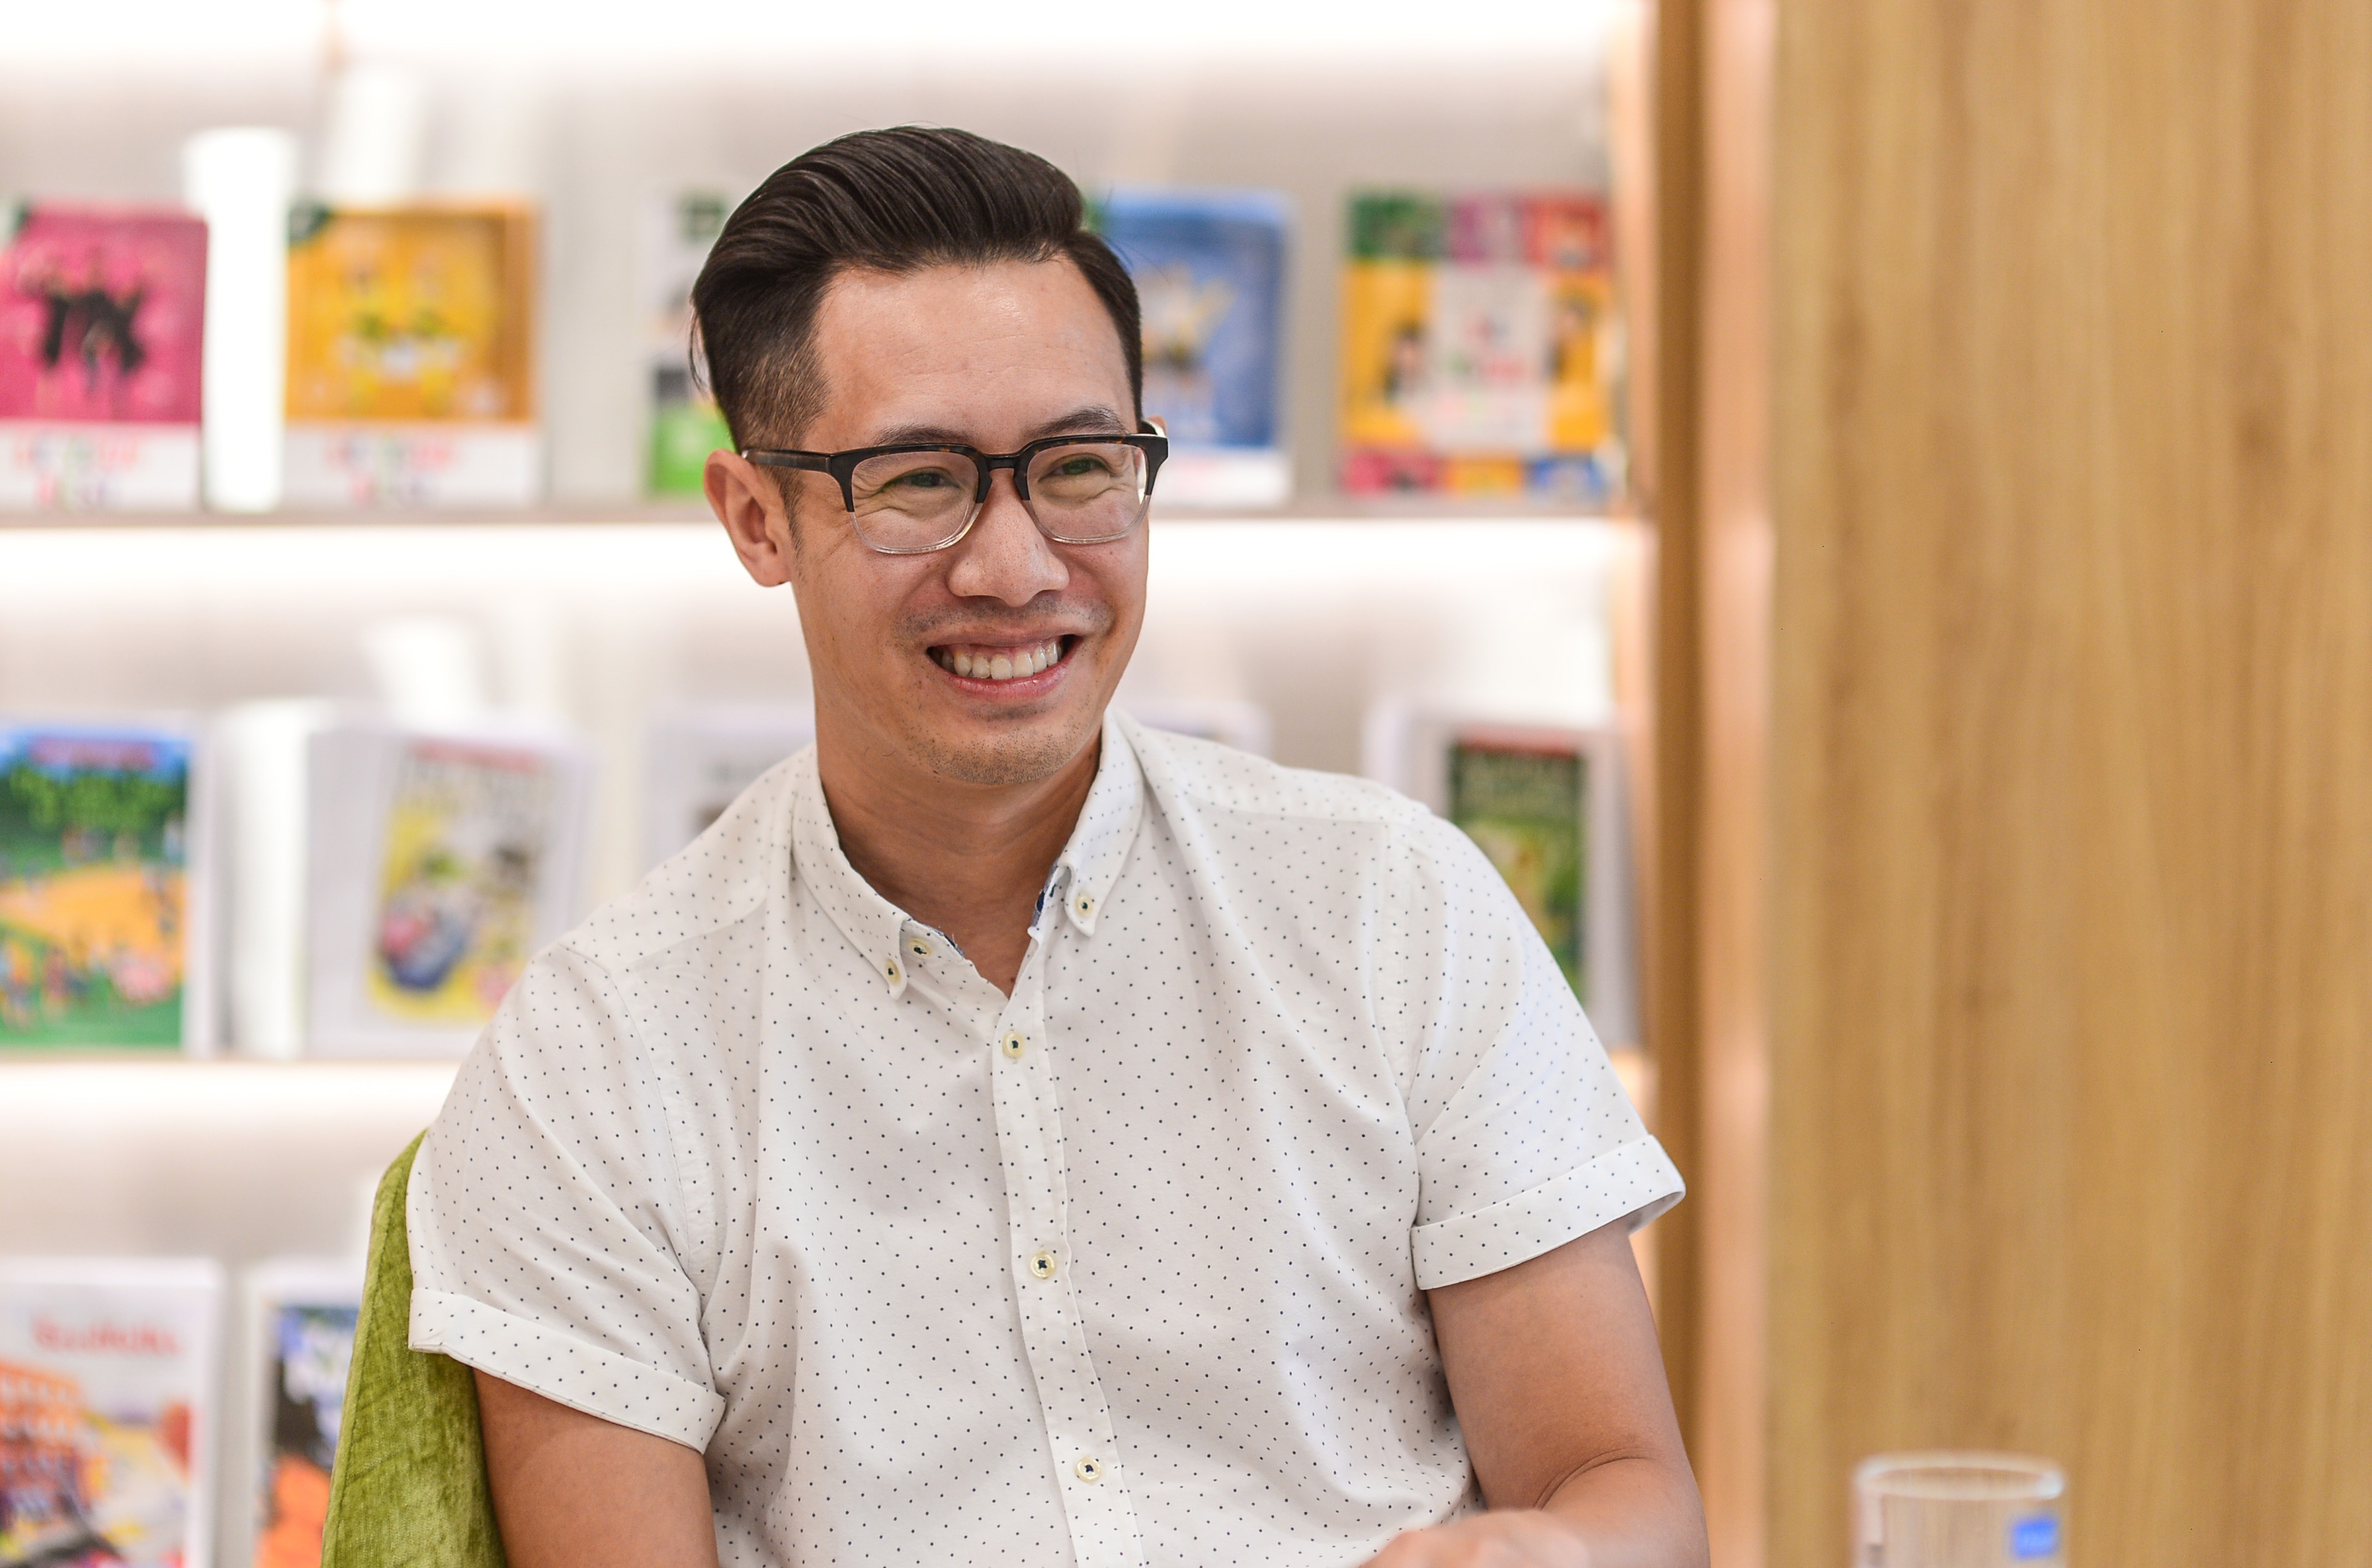 Don Le is seen during his interview with Tuoi Tre News in Ho Chi Minh City in April 2022. Photo: Quang Dinh / Tuoi Tre News